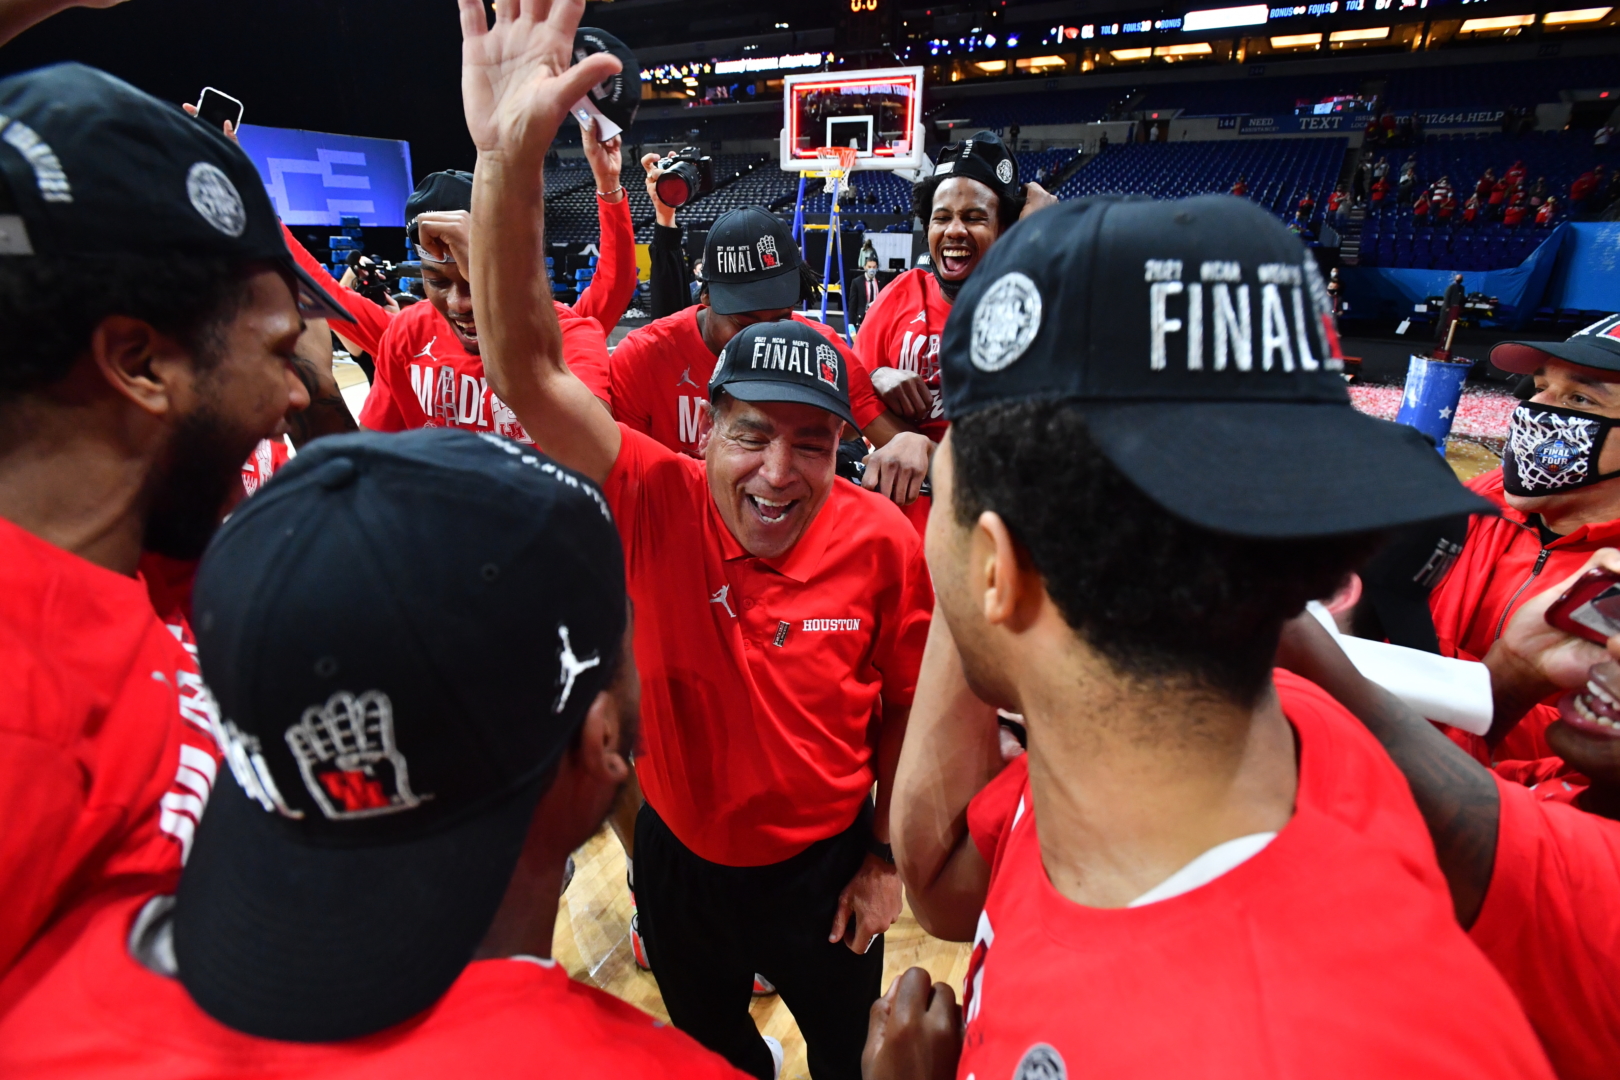 INDIANAPOLIS, IN - MARCH 29: UH basketball head coach Kelvin Sampson celebrates the Cougars victory over Oregon State at Lucas Oil Stadium on March 29, 2021 in Indianapolis, Indiana. (Photo by Brett Wilhelm/NCAA Photos via Getty Images)